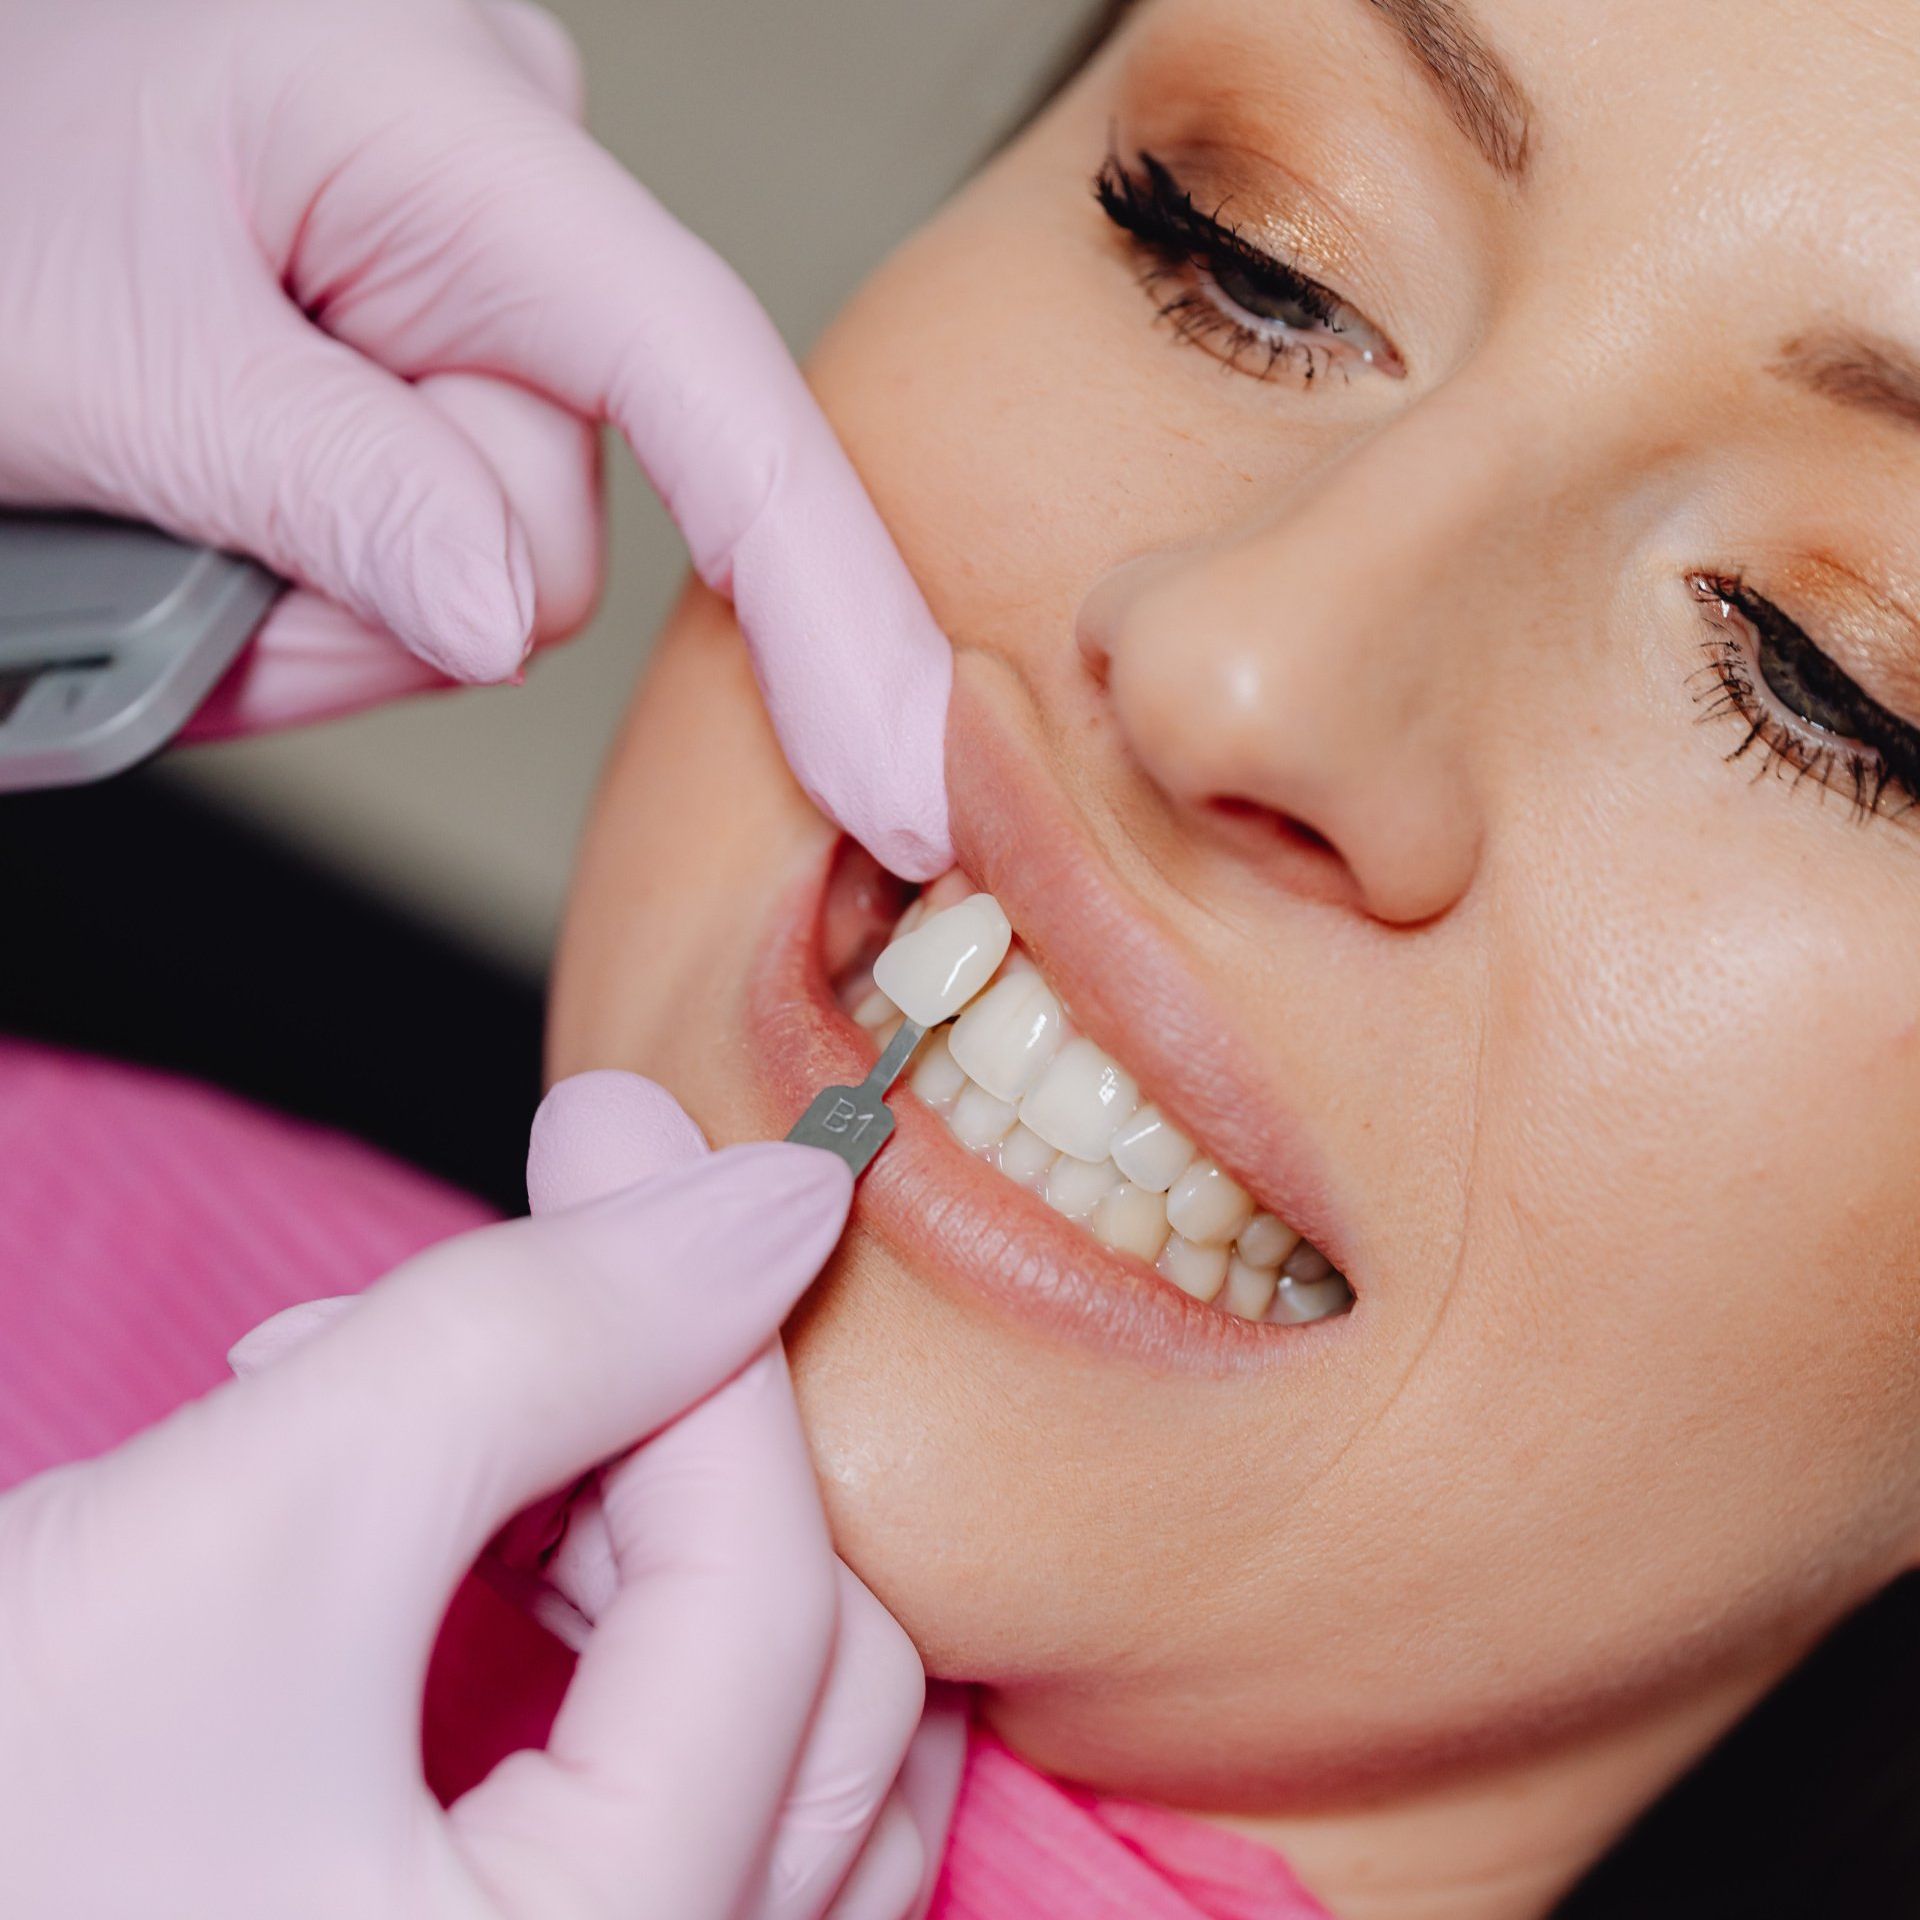 A woman is getting her teeth whitened by a dentist.